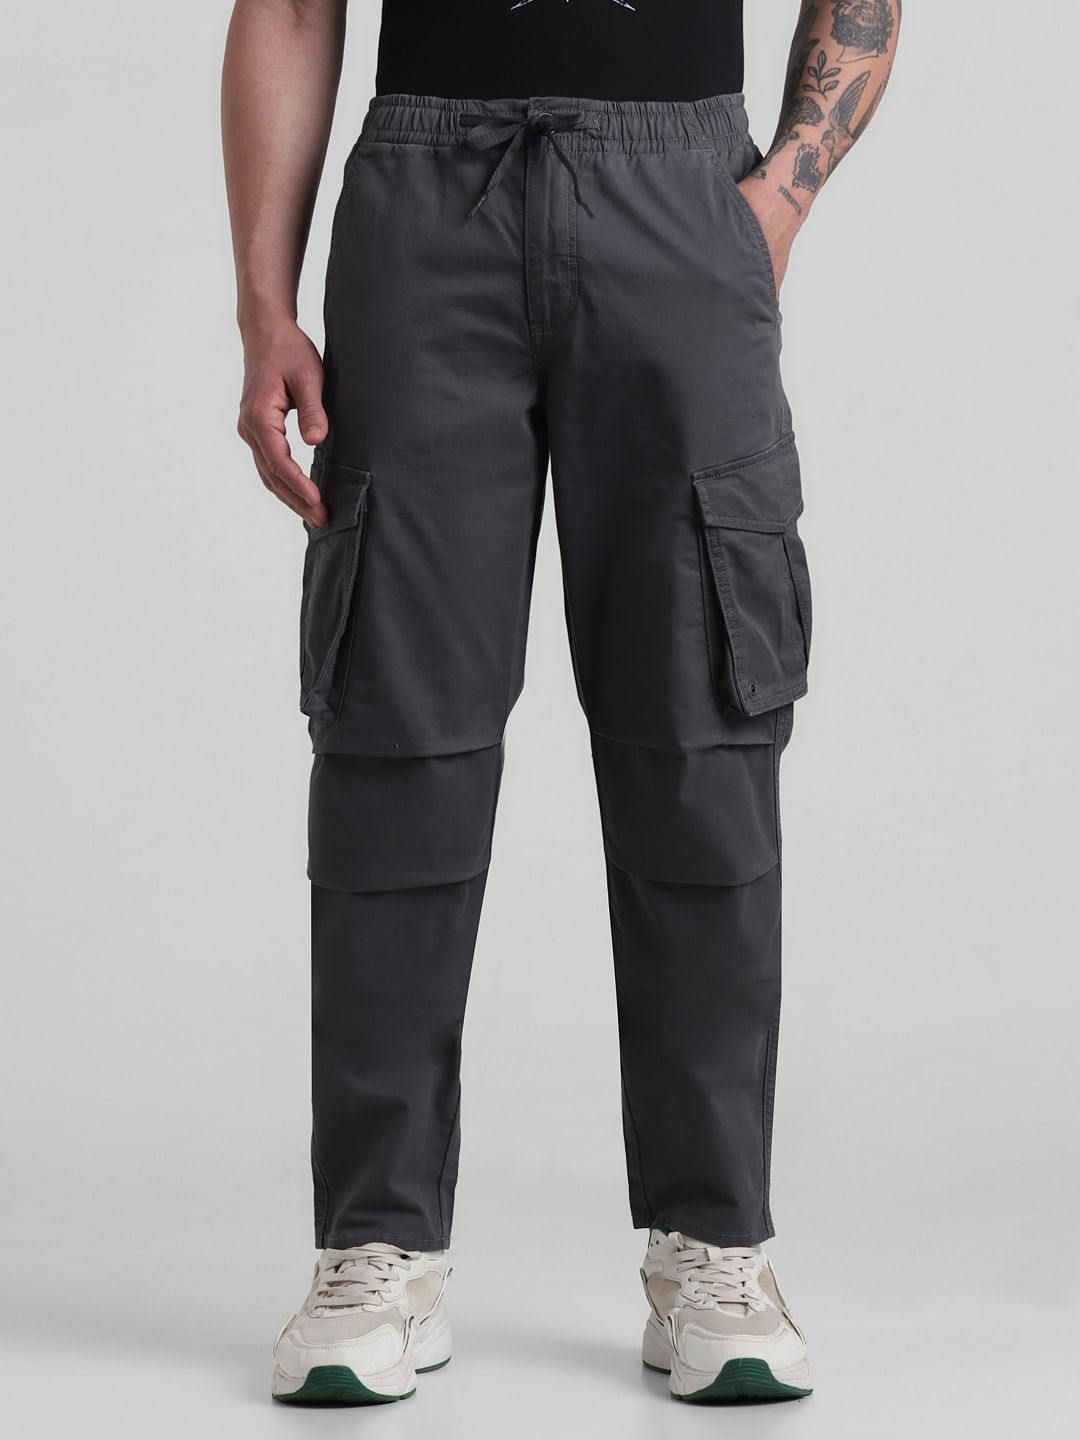 Men Letter Patched Cargo Pants | Cool outfits for men, Grey cargo pants, Cargo  pants outfit men